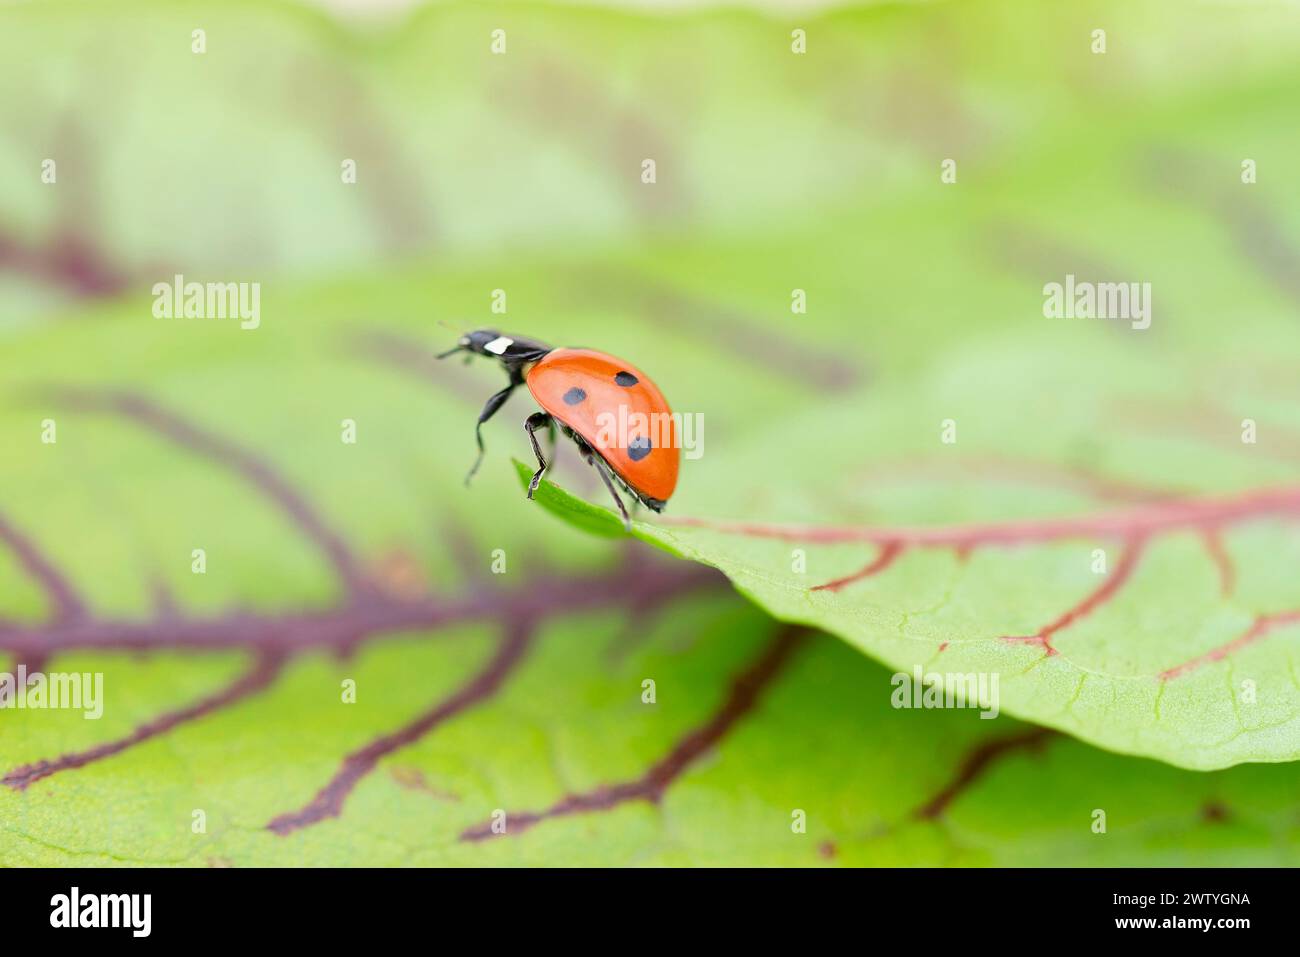 An arthropod insect, the ladybug, is perched on a green leaf of a terrestrial plant. These red bugs are beneficial organisms that prey on pests like b Stock Photo